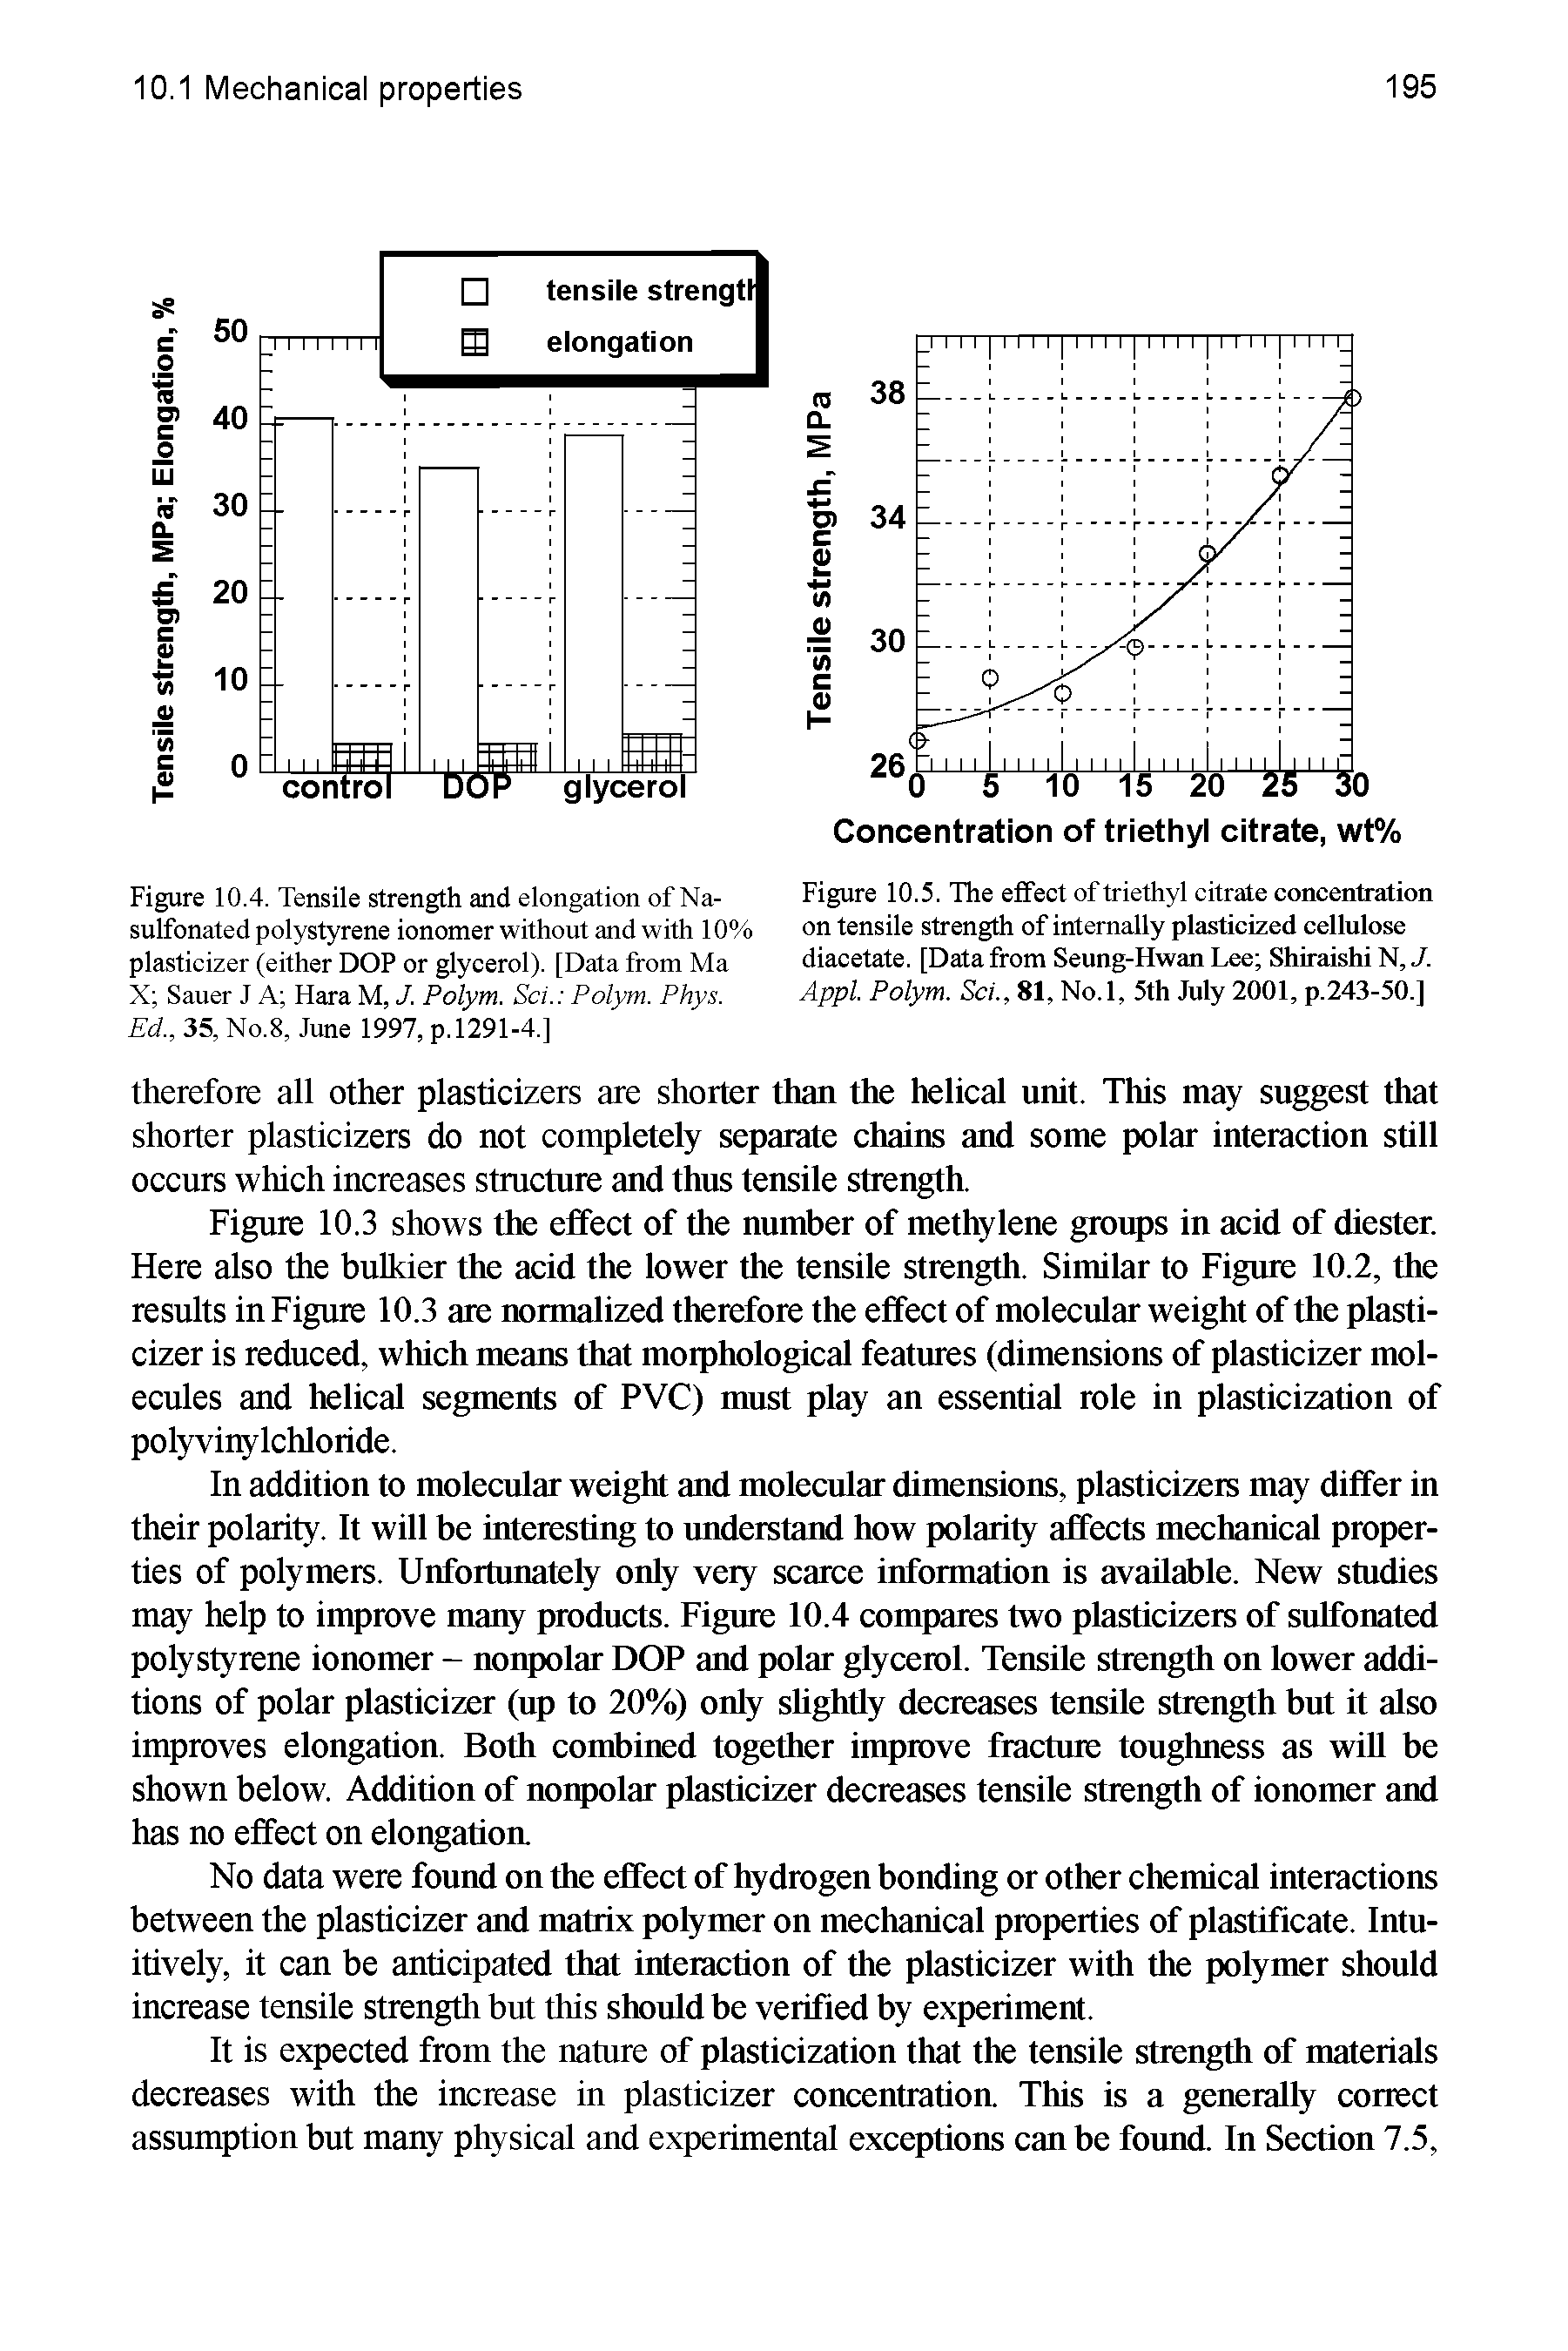 Figure 10.5. The effect of triethyl citrate concentration on tensile strength of internally plasticized cellulose diacetate. [Data from Seung-Hwan Lee Shiraishi N, J. Appl. Polym. Sci., 81, No.l, 5th July 2001, p.243-50.]...